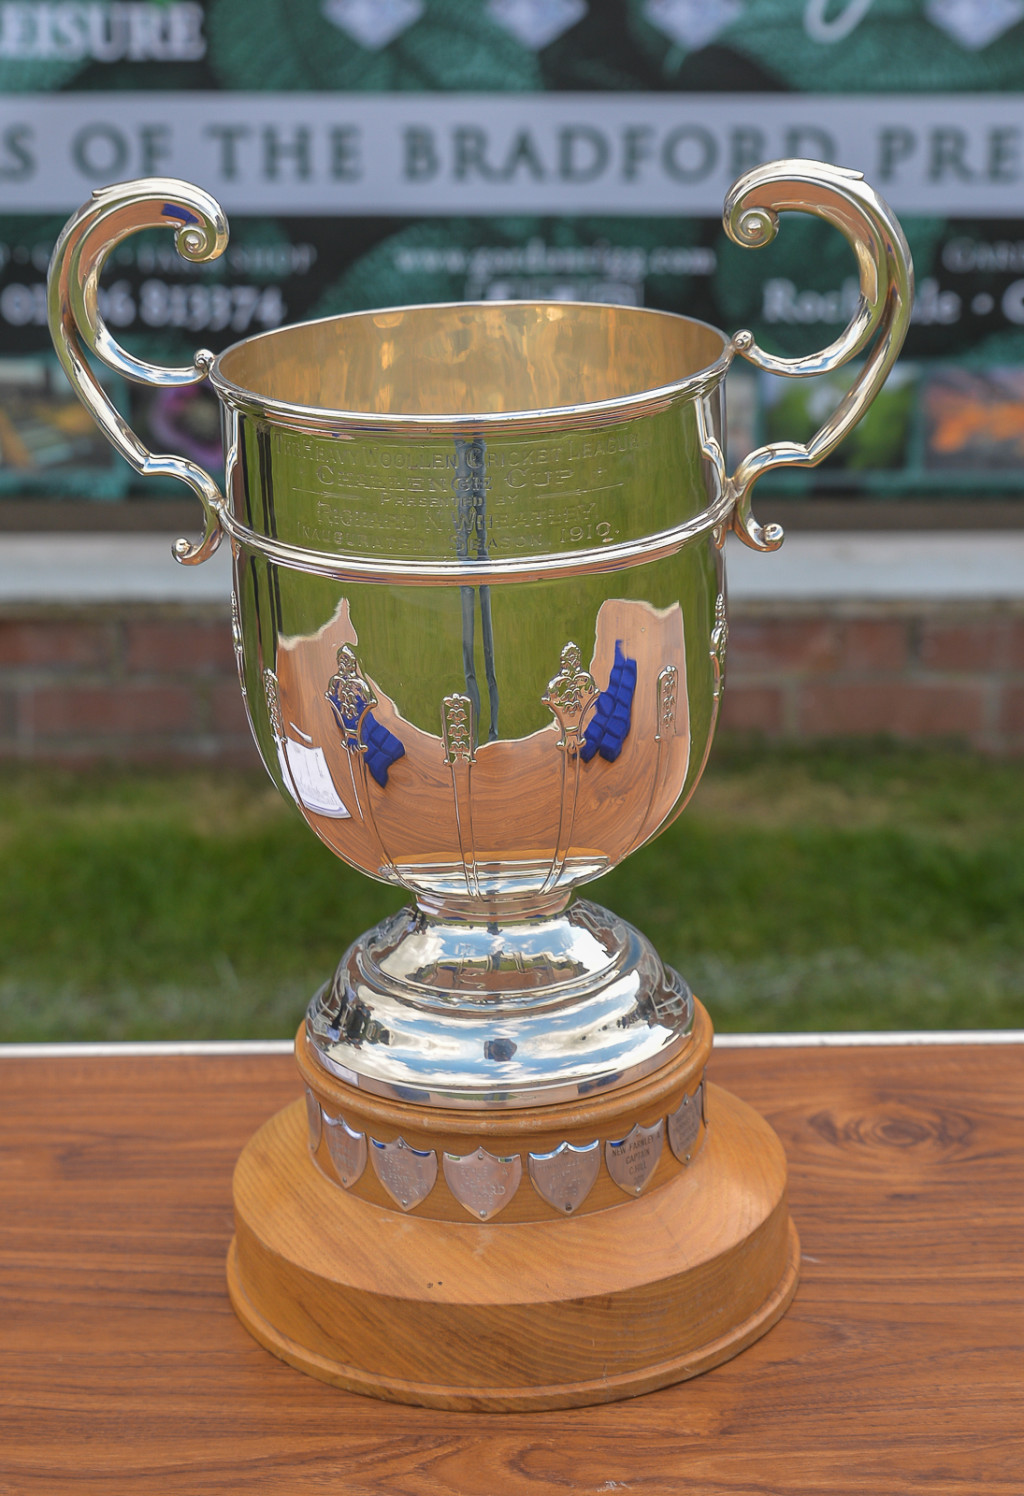 Bankfoot face biggest T20 Cup test